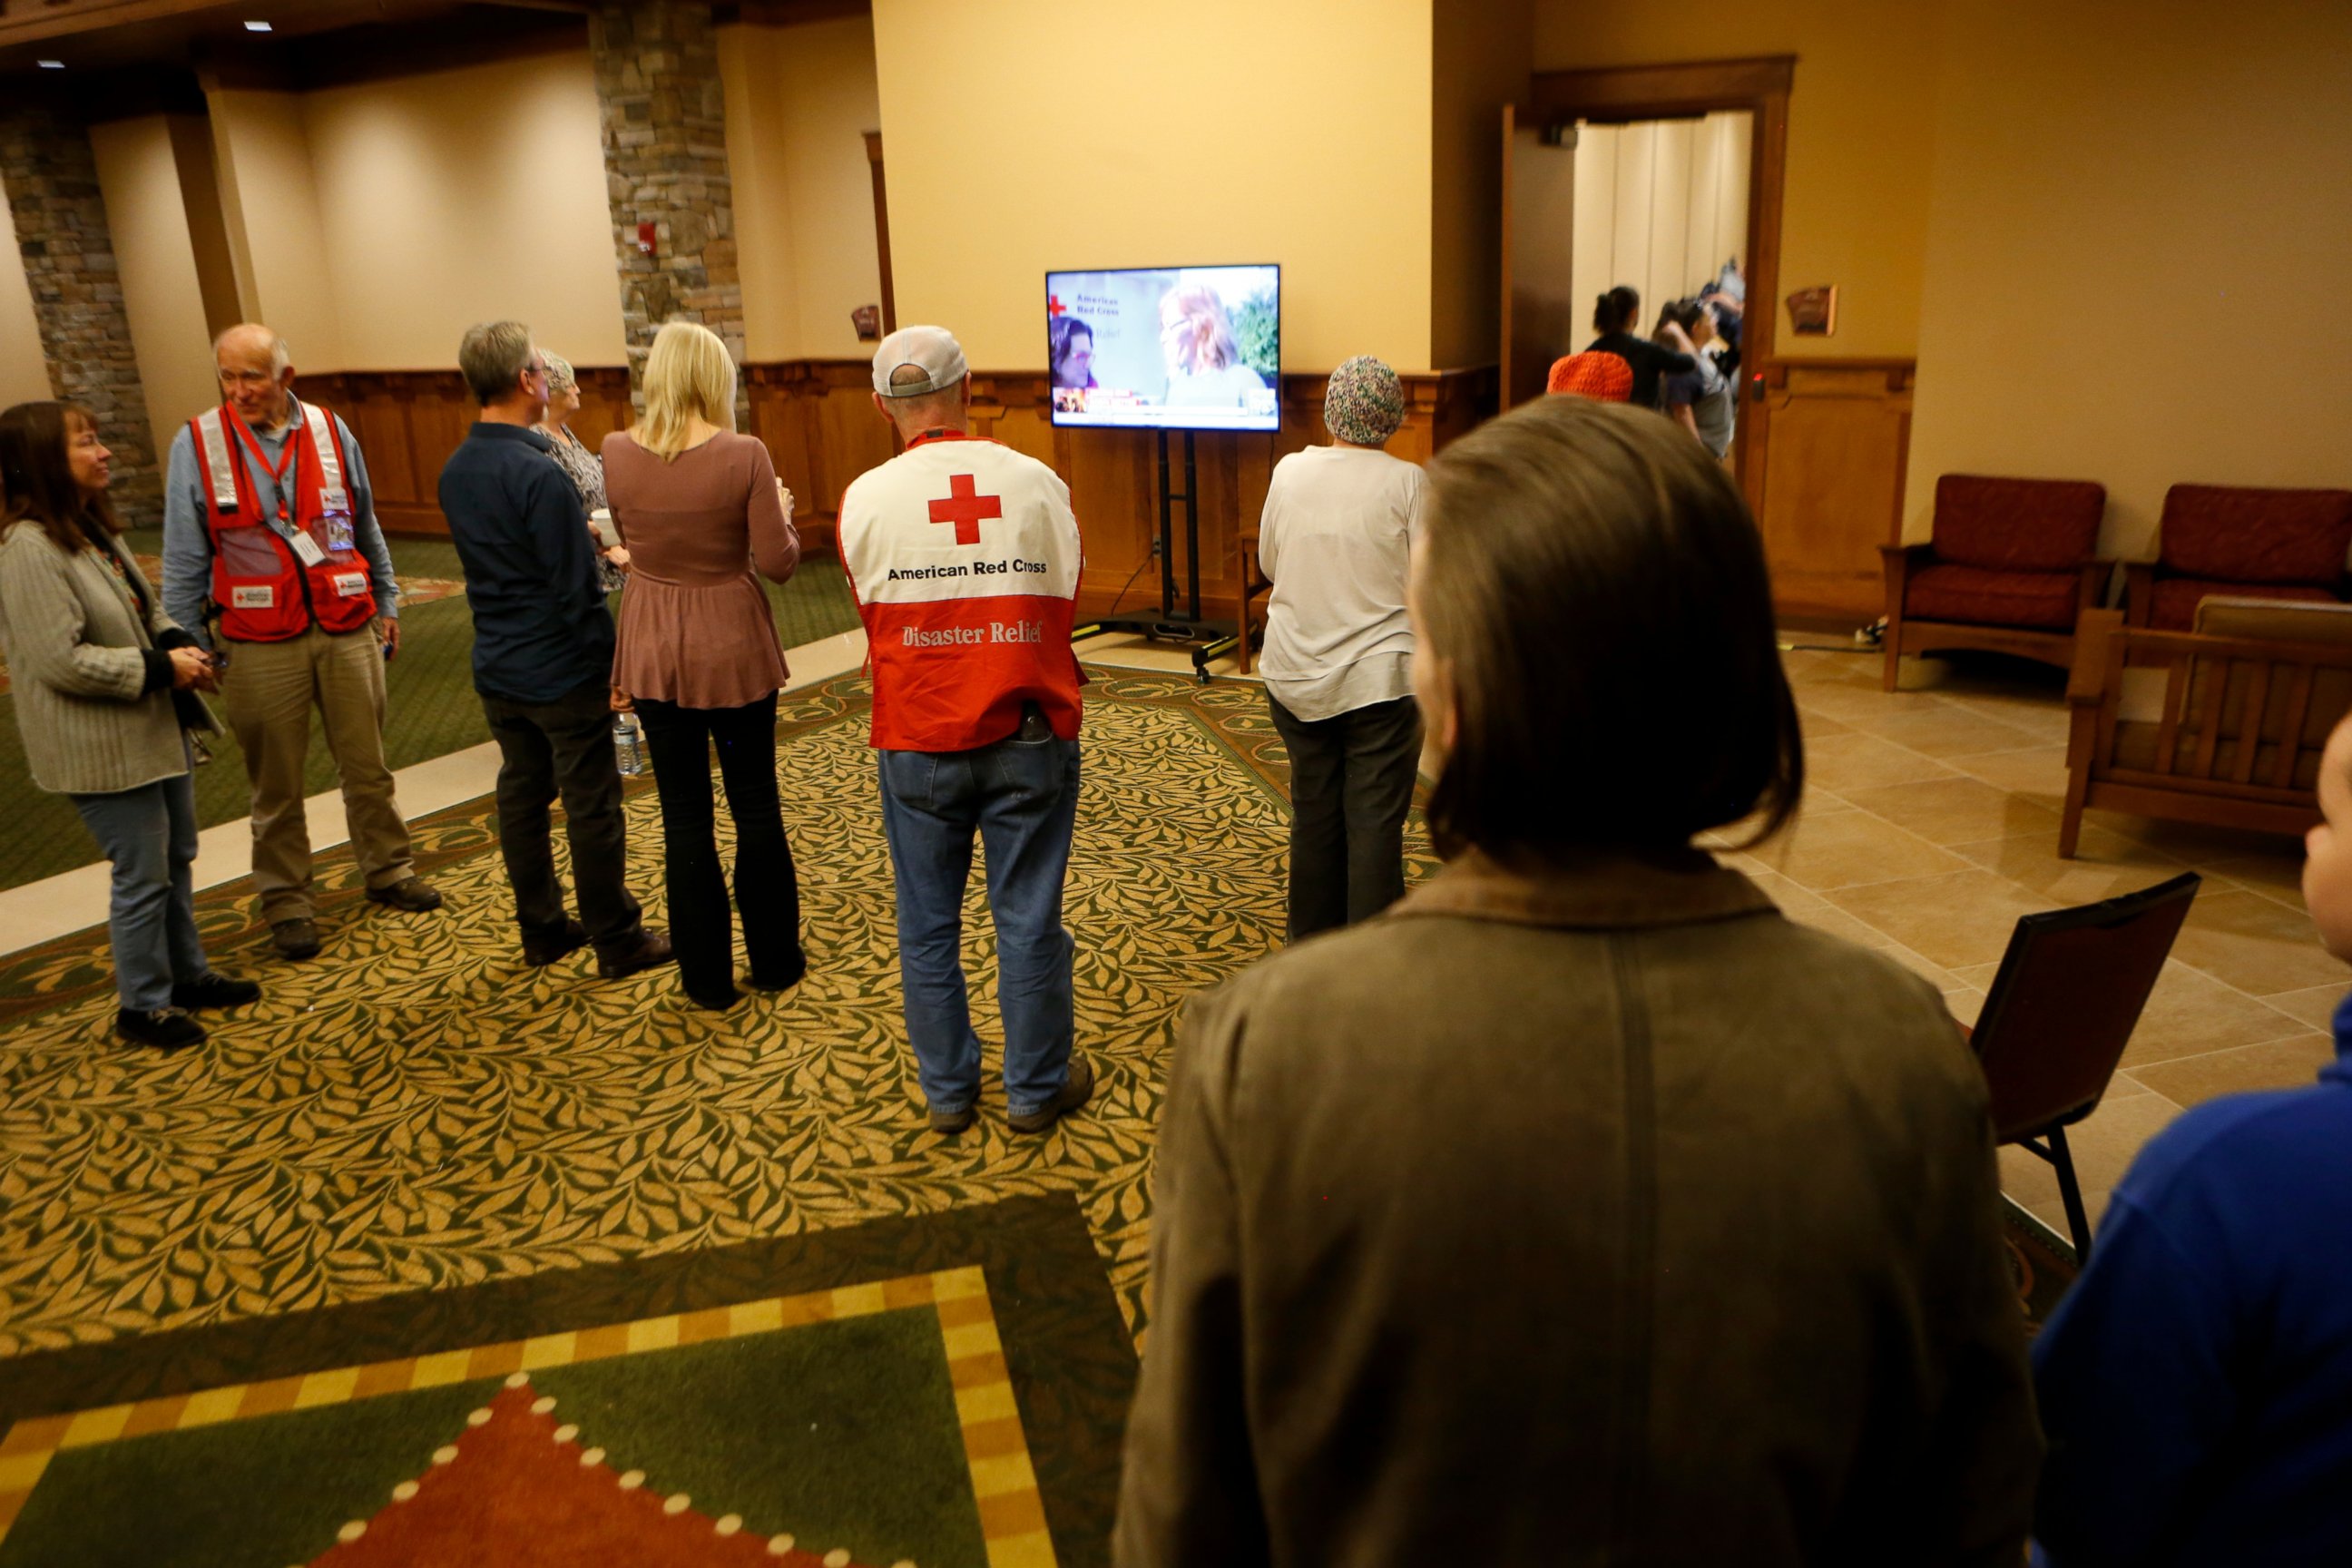 PHOTO: Volunteers and evacuees watch a news segment about the nearby fire in Gatlinburg, Tennessee at a shelter, on Nov. 29, 2016, in Pigeon Forge, Tennessee. 